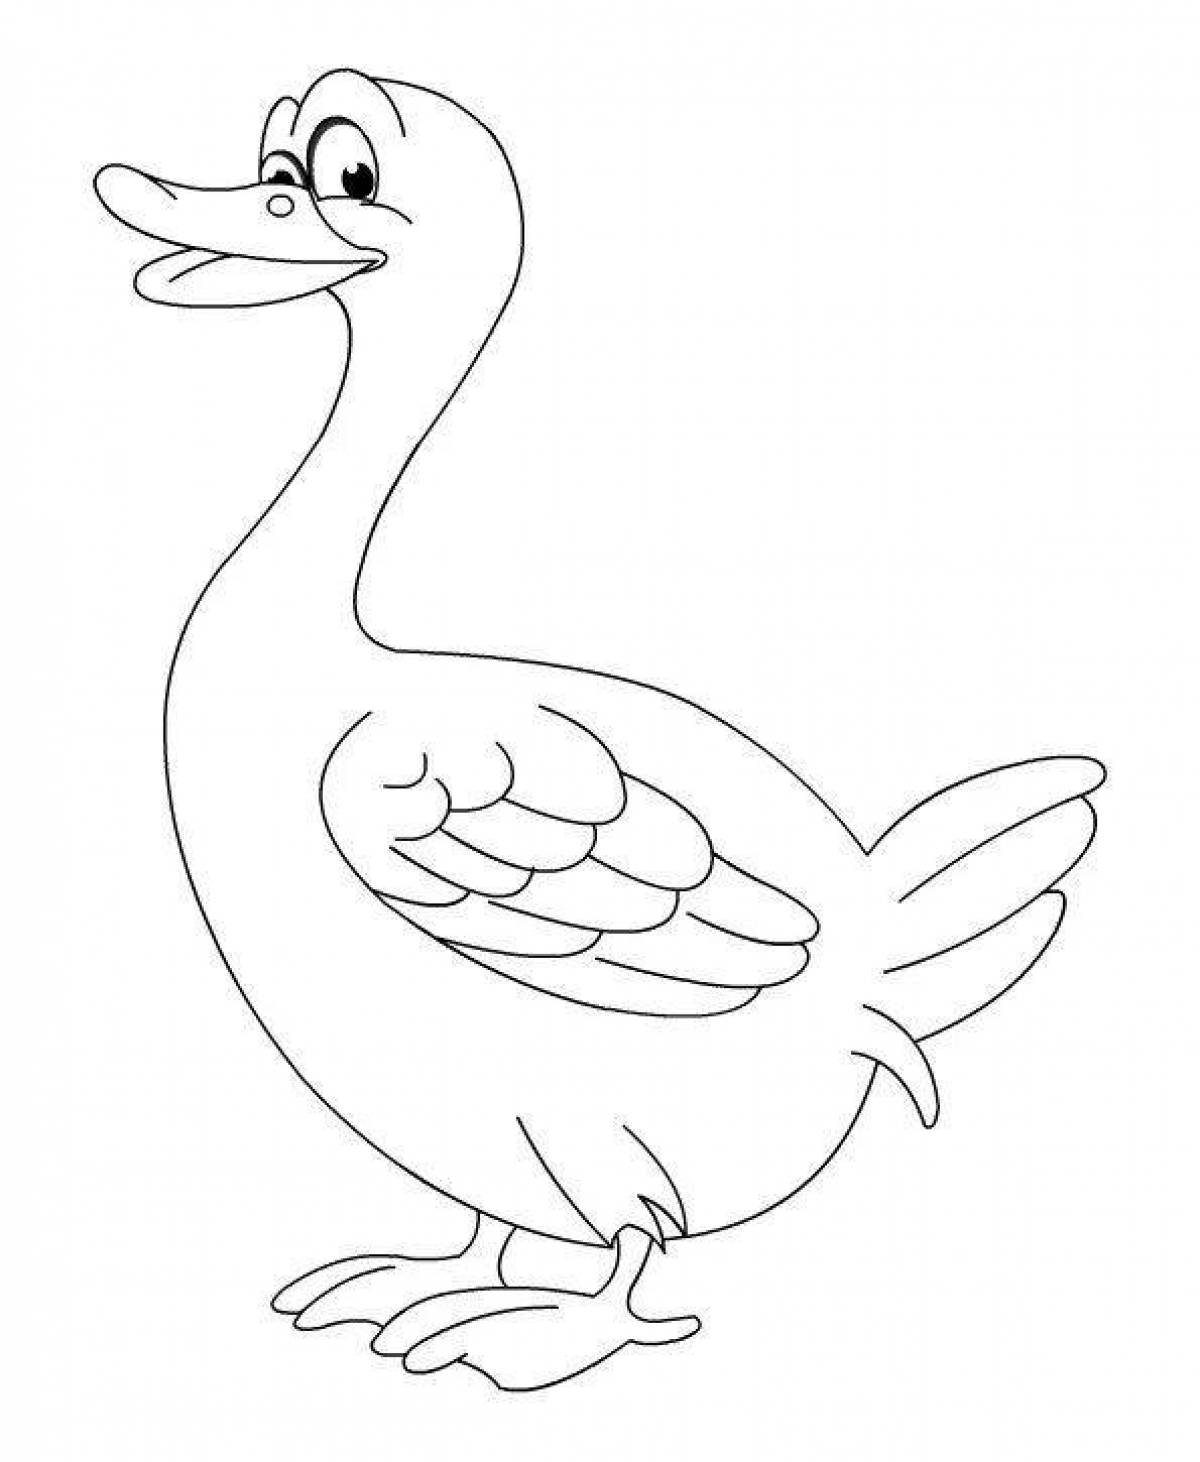 Colorful goose coloring pages for kids